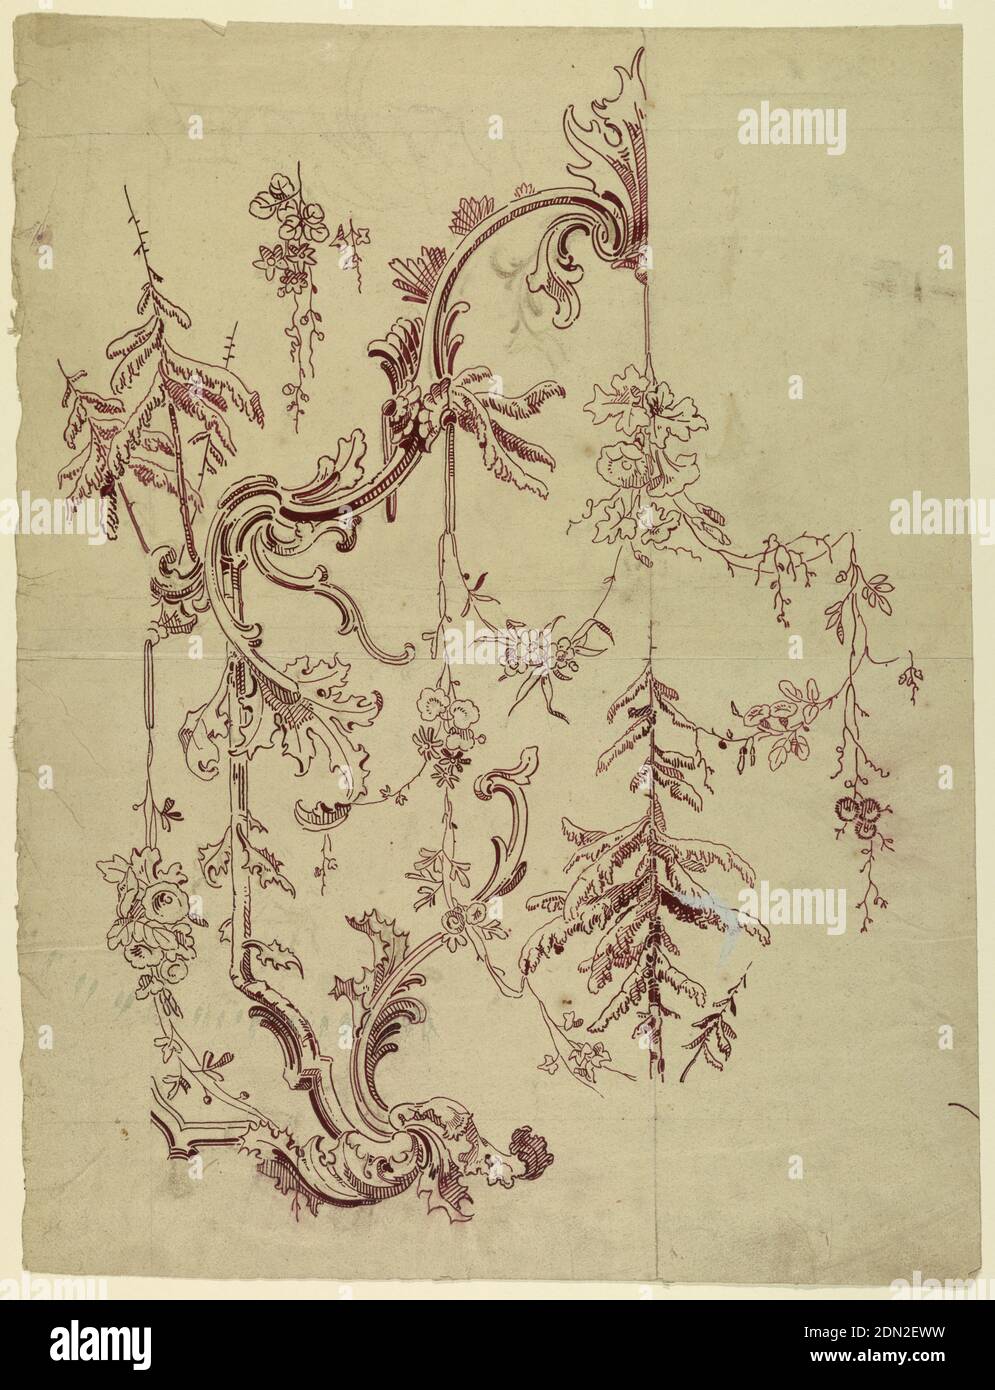 Design for a Woven or Printed Fabric or Wallaper, Graphite, brush and purple watercolor on paper, Escutcheon in Neo-Rococo style with evergreens and festoons of flowers. The left half of an escutcheon and part of the plant design are shown. Verso: graphite lines and blotters of crayon sketches of escutcheons., France, 1815–1840, Drawing Stock Photo